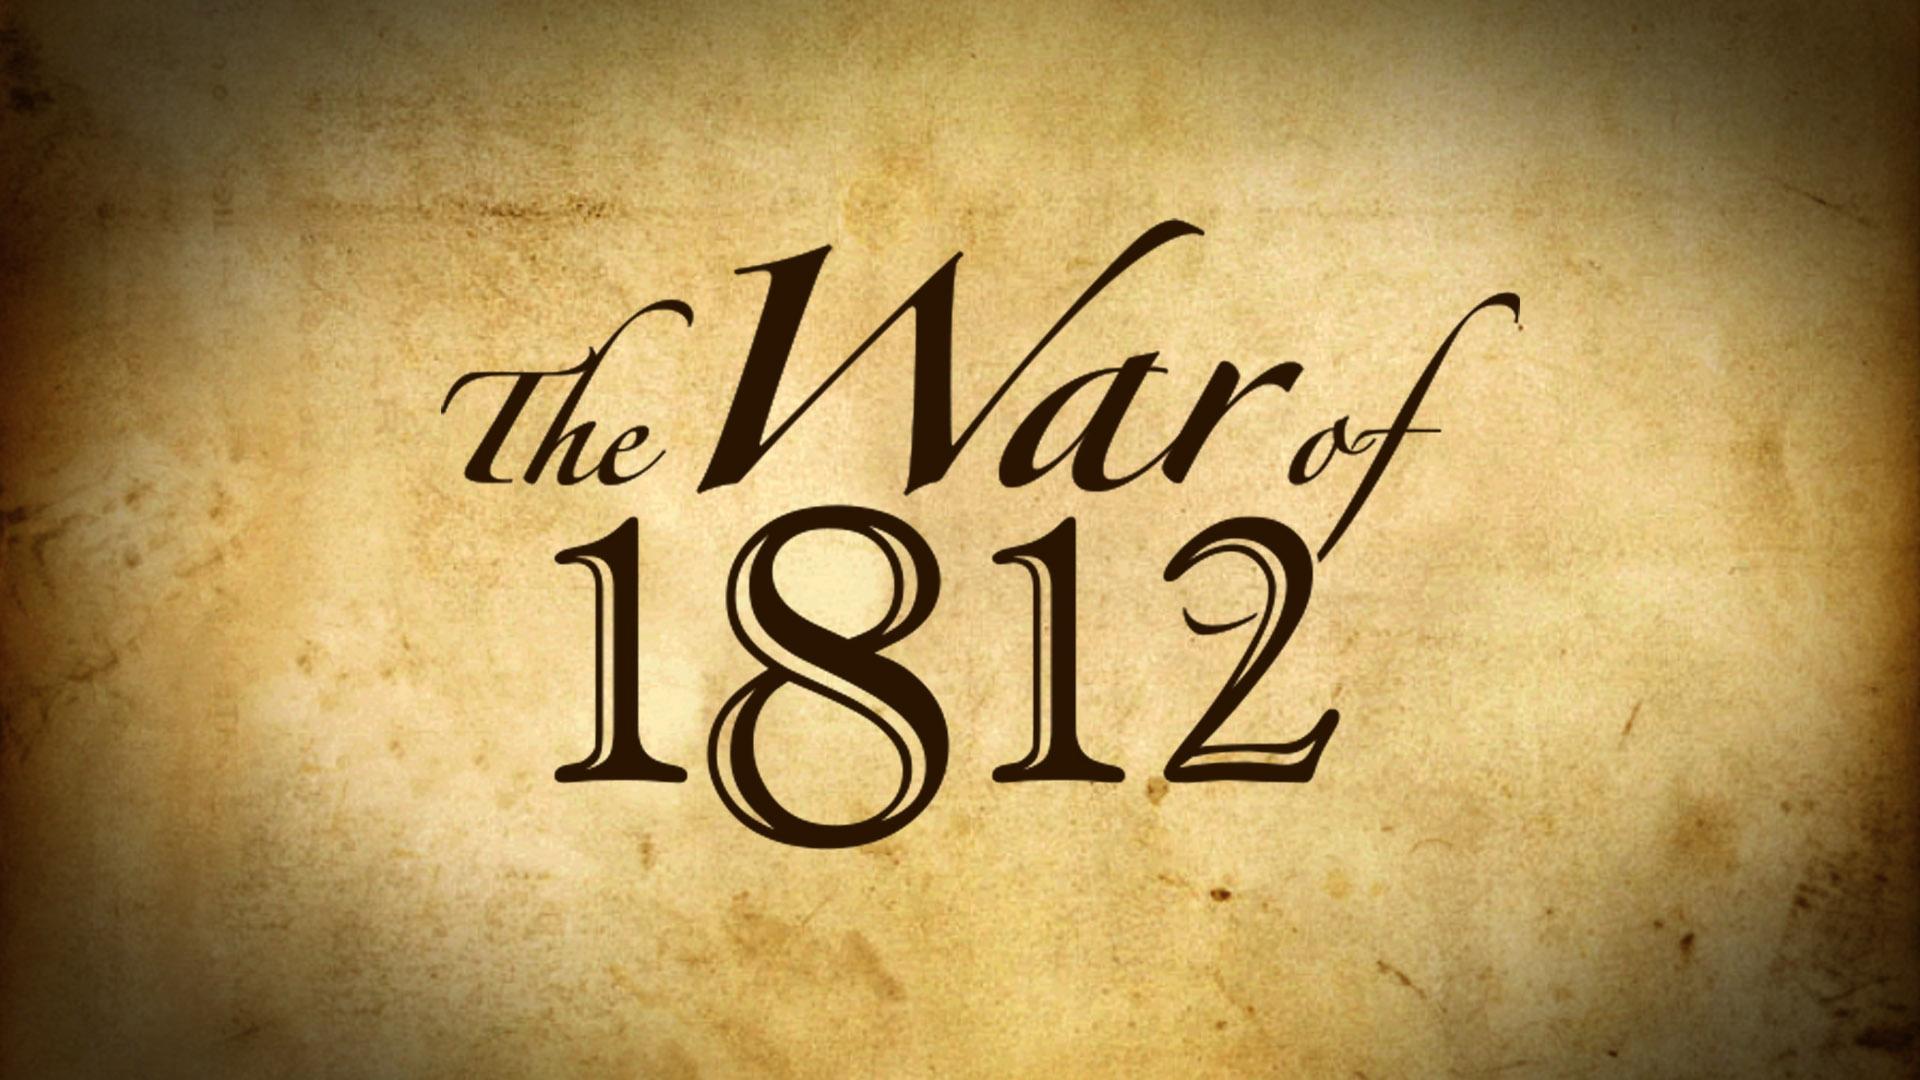 essay about war of 1812